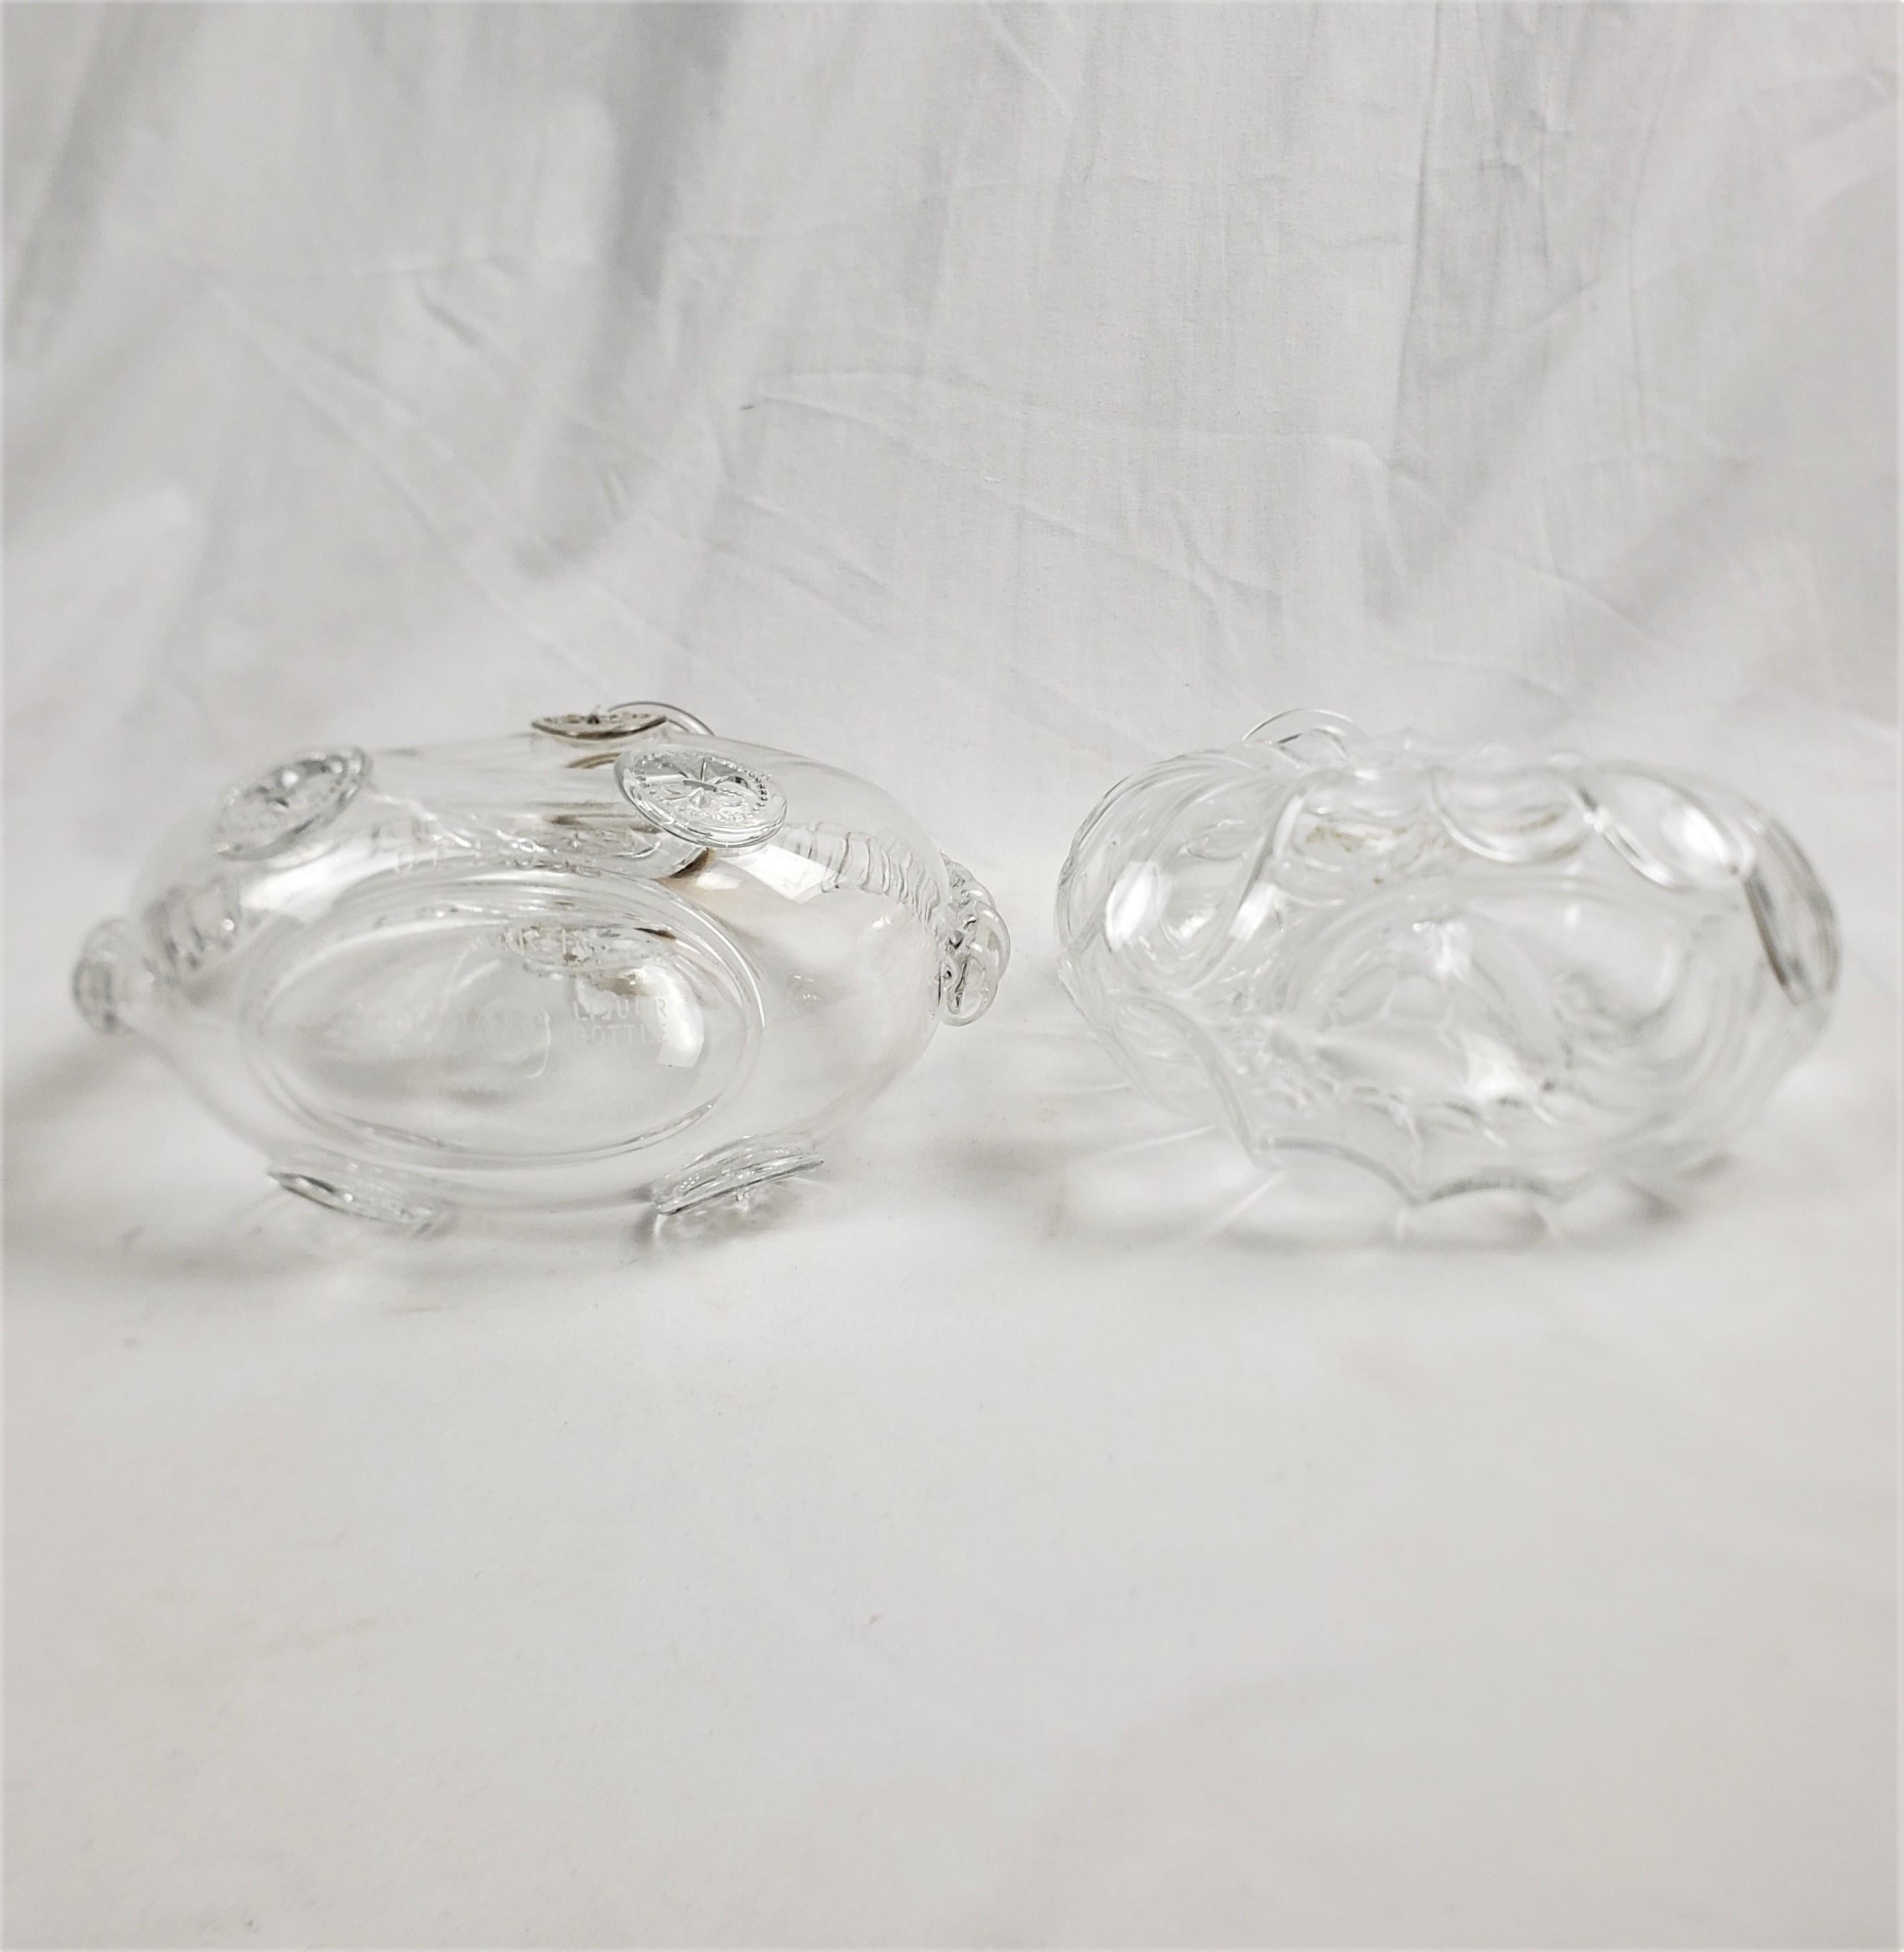 Pair of Baccarat Crystal Mid-Century Remy Martin Liquor Bottles or Decanters In Good Condition For Sale In Hamilton, Ontario